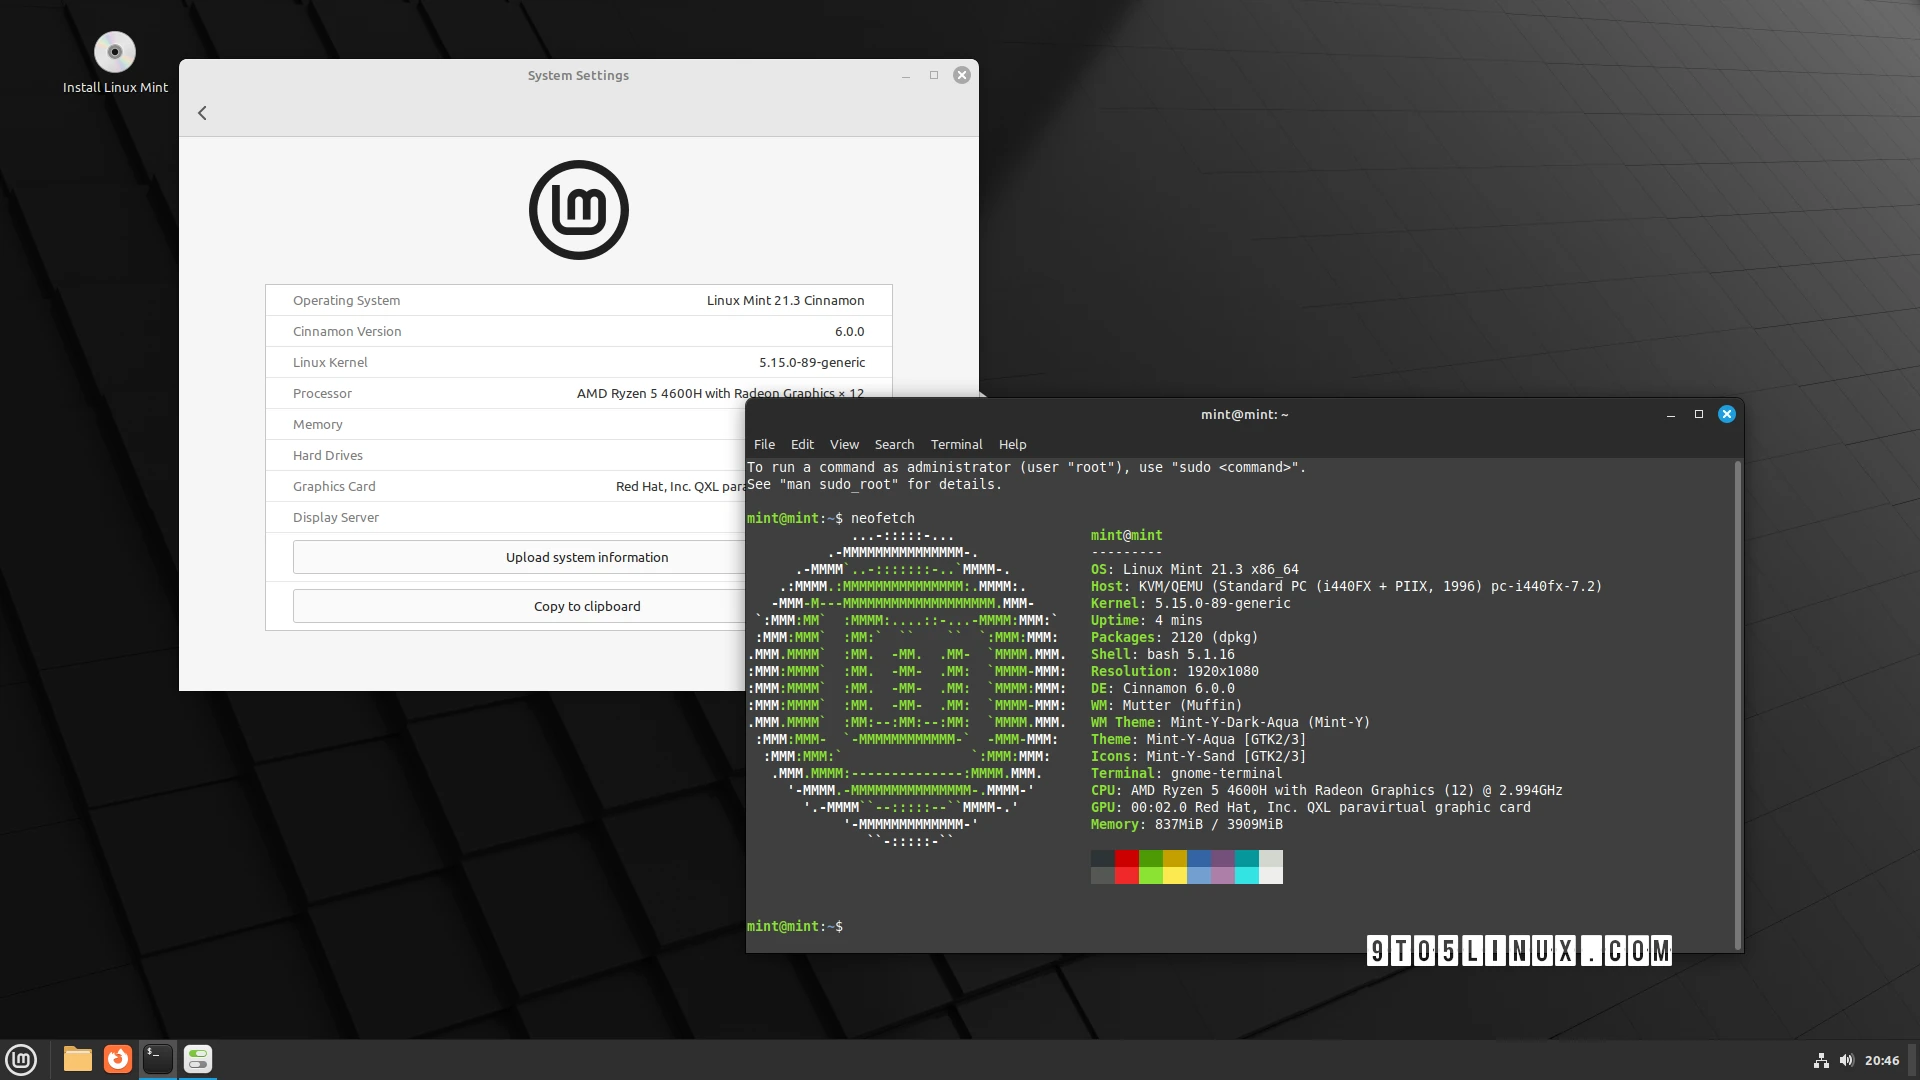 Linux Mint 21.3 EDGE ISO to Ship with Linux 6.5, Addressing Hardware Issues